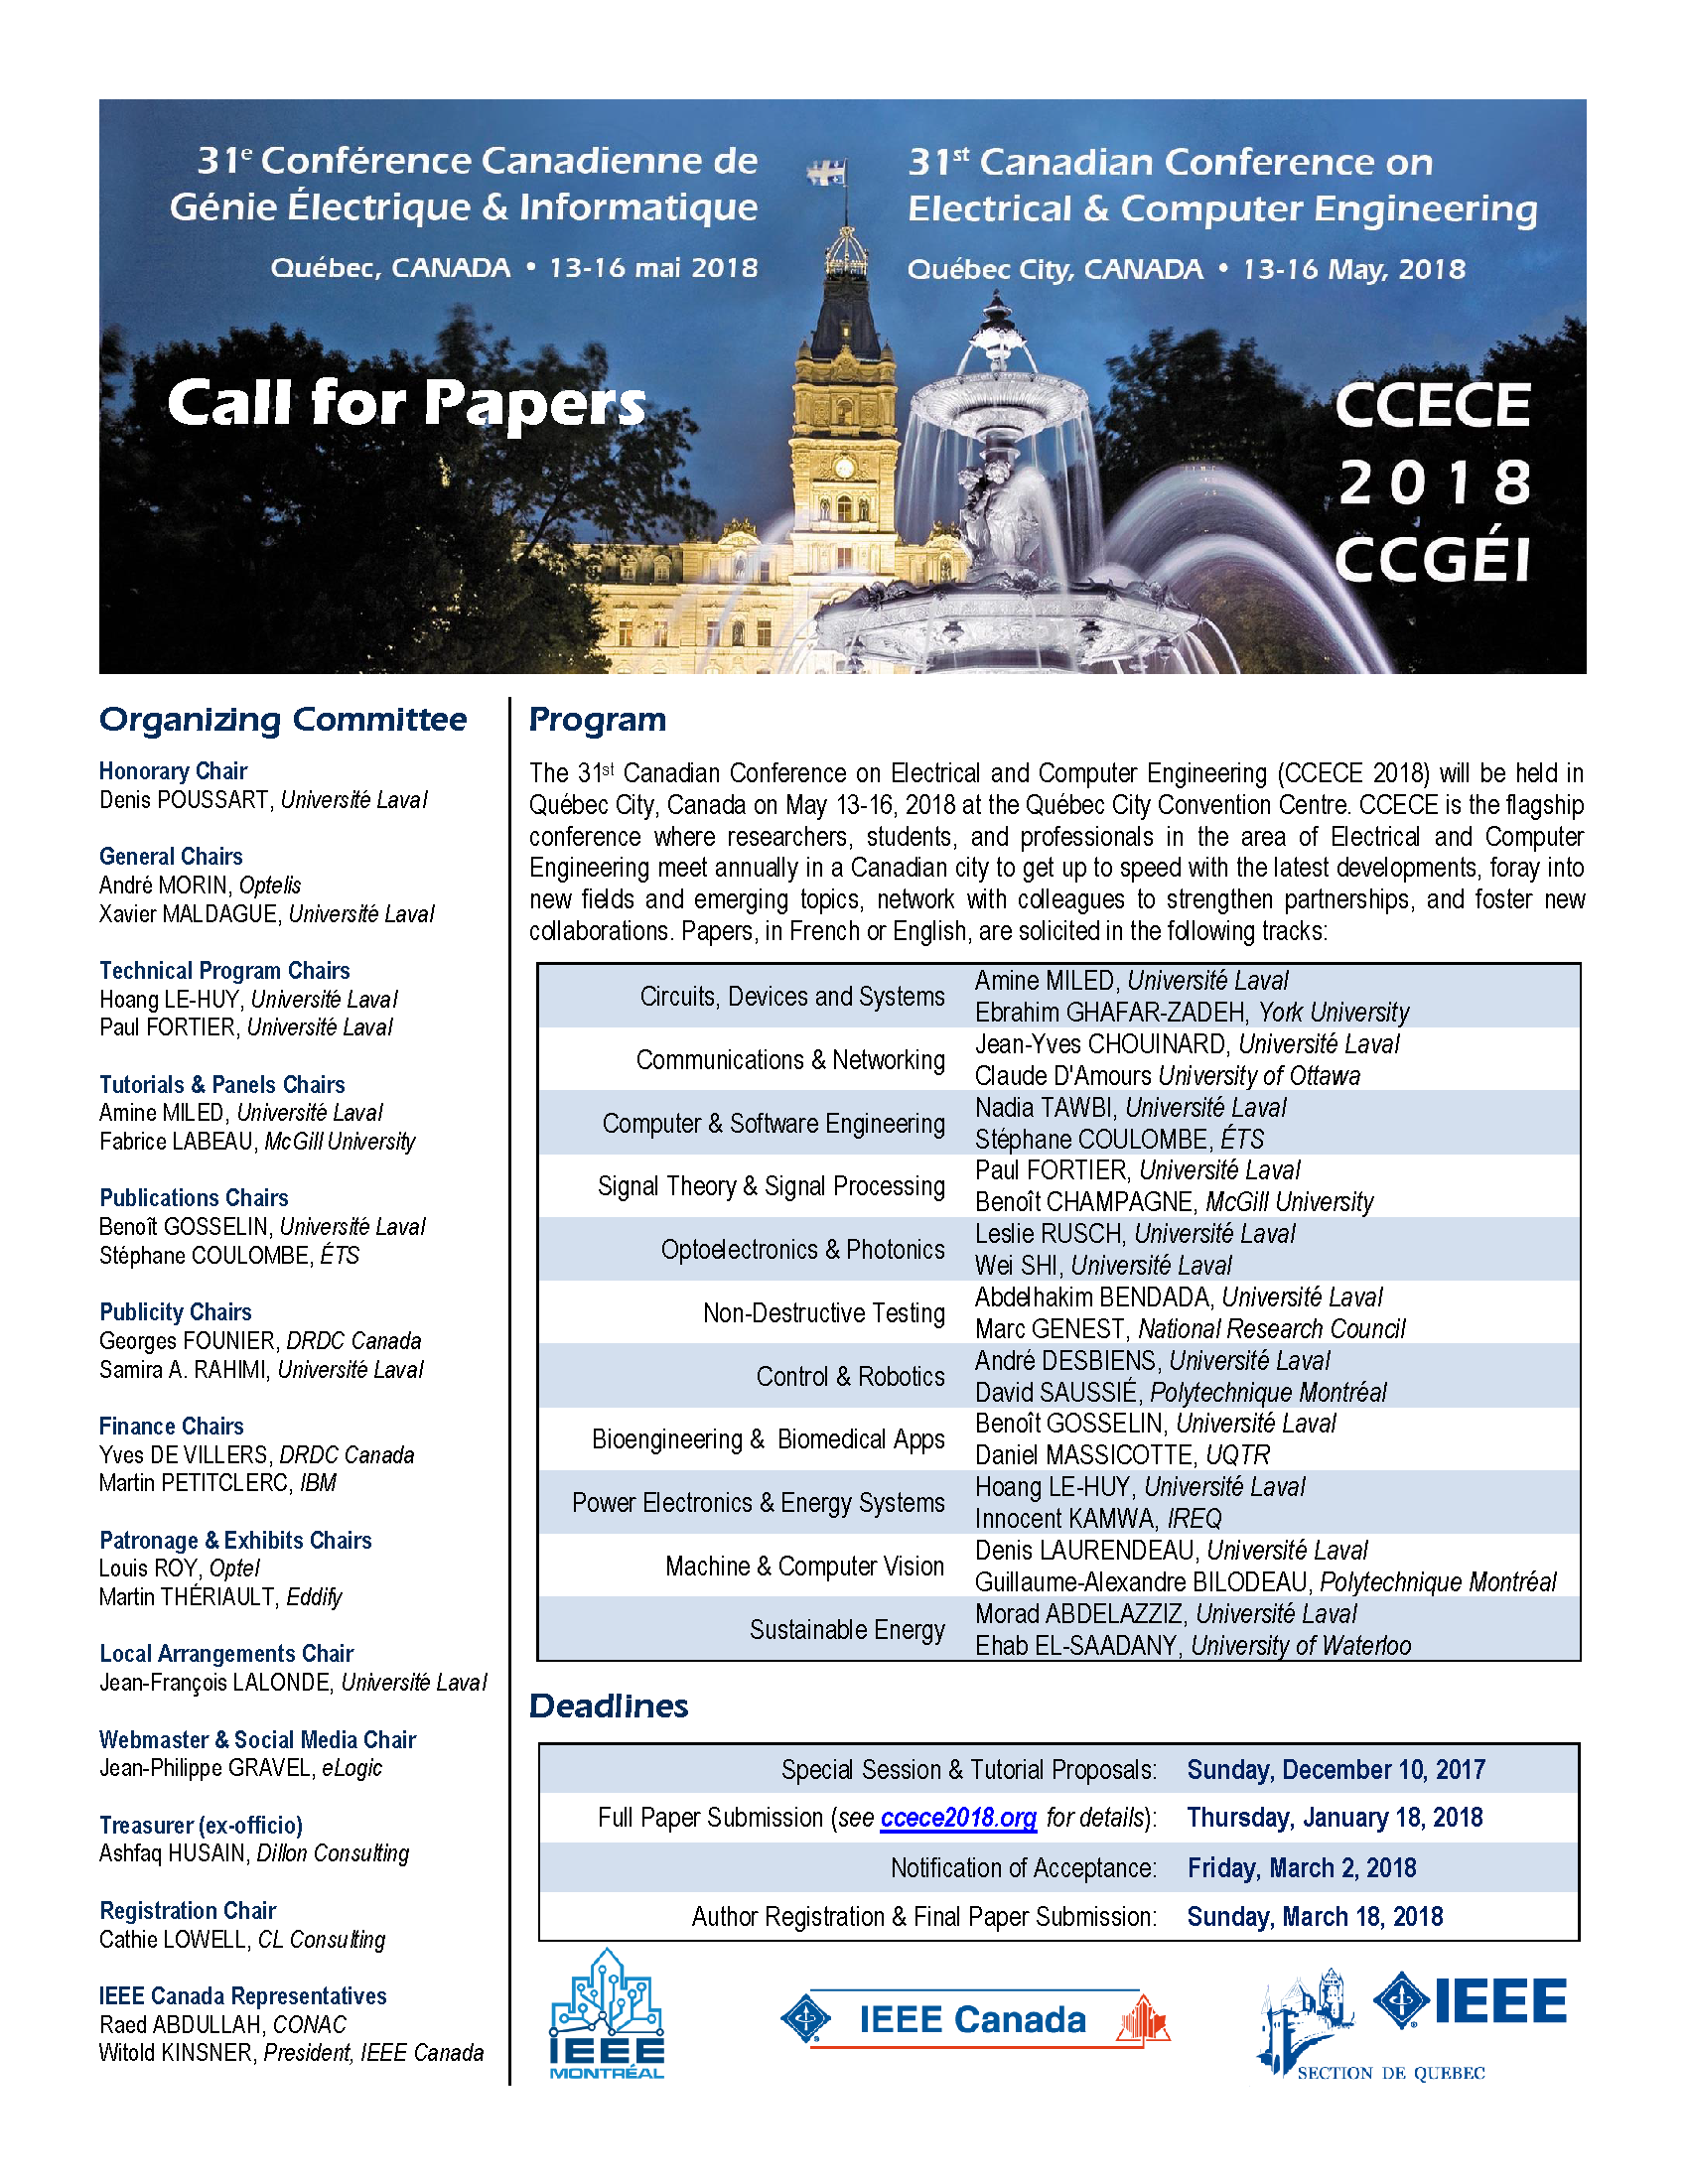 CCECE 2018 Call for Papers